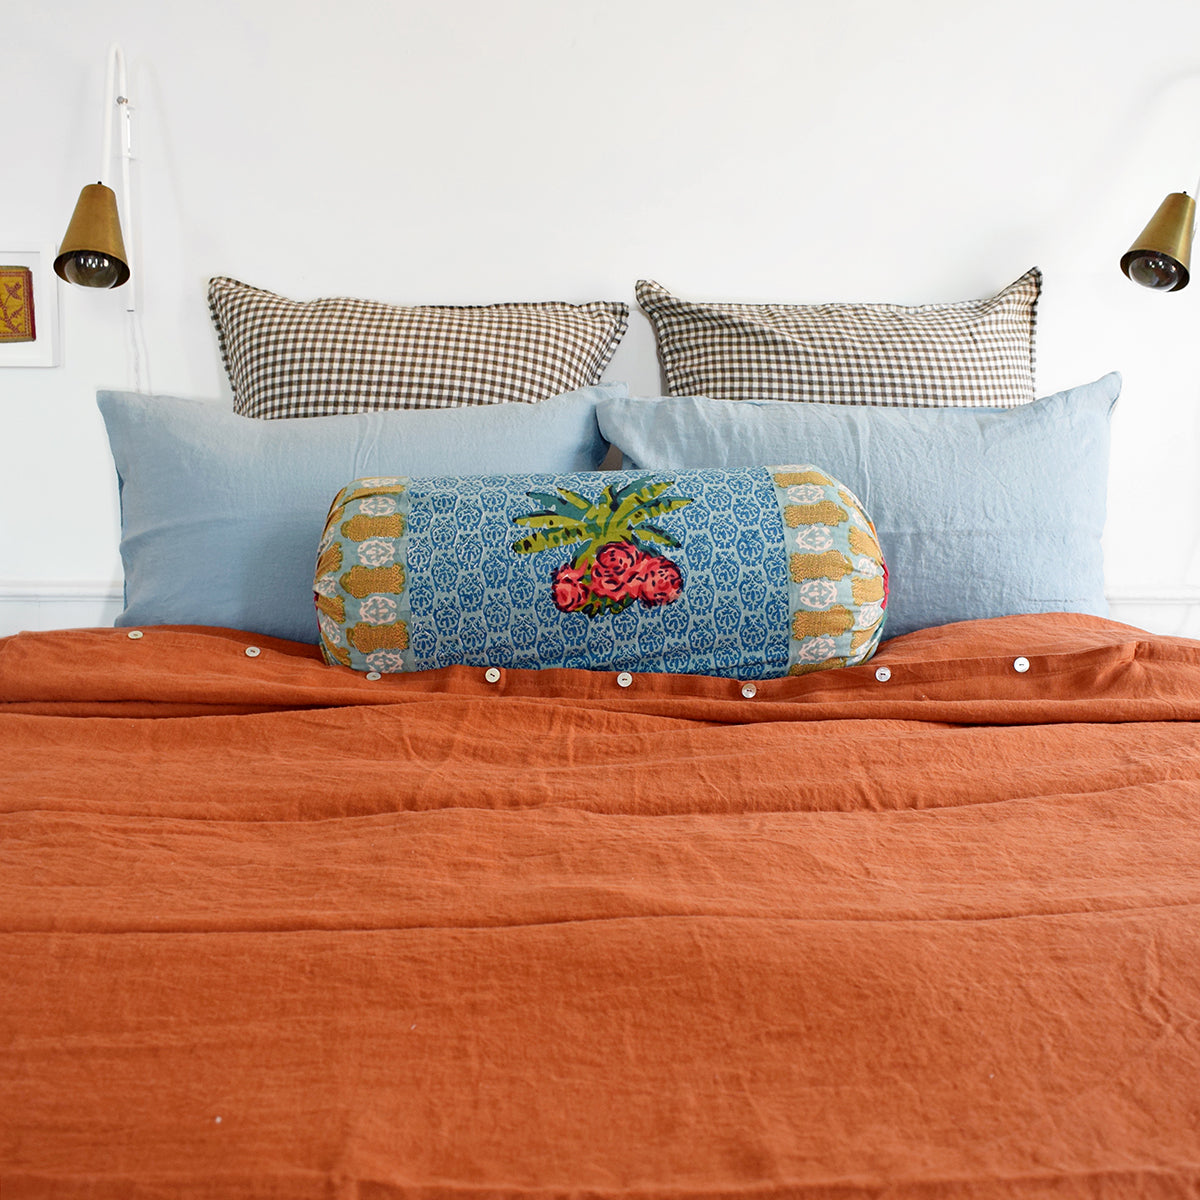 A Linge Particulier Linen Duvet in Sienna gives a orange and rust color to this duvet for a colorful linen bedding look from Collyer&#39;s Mansion